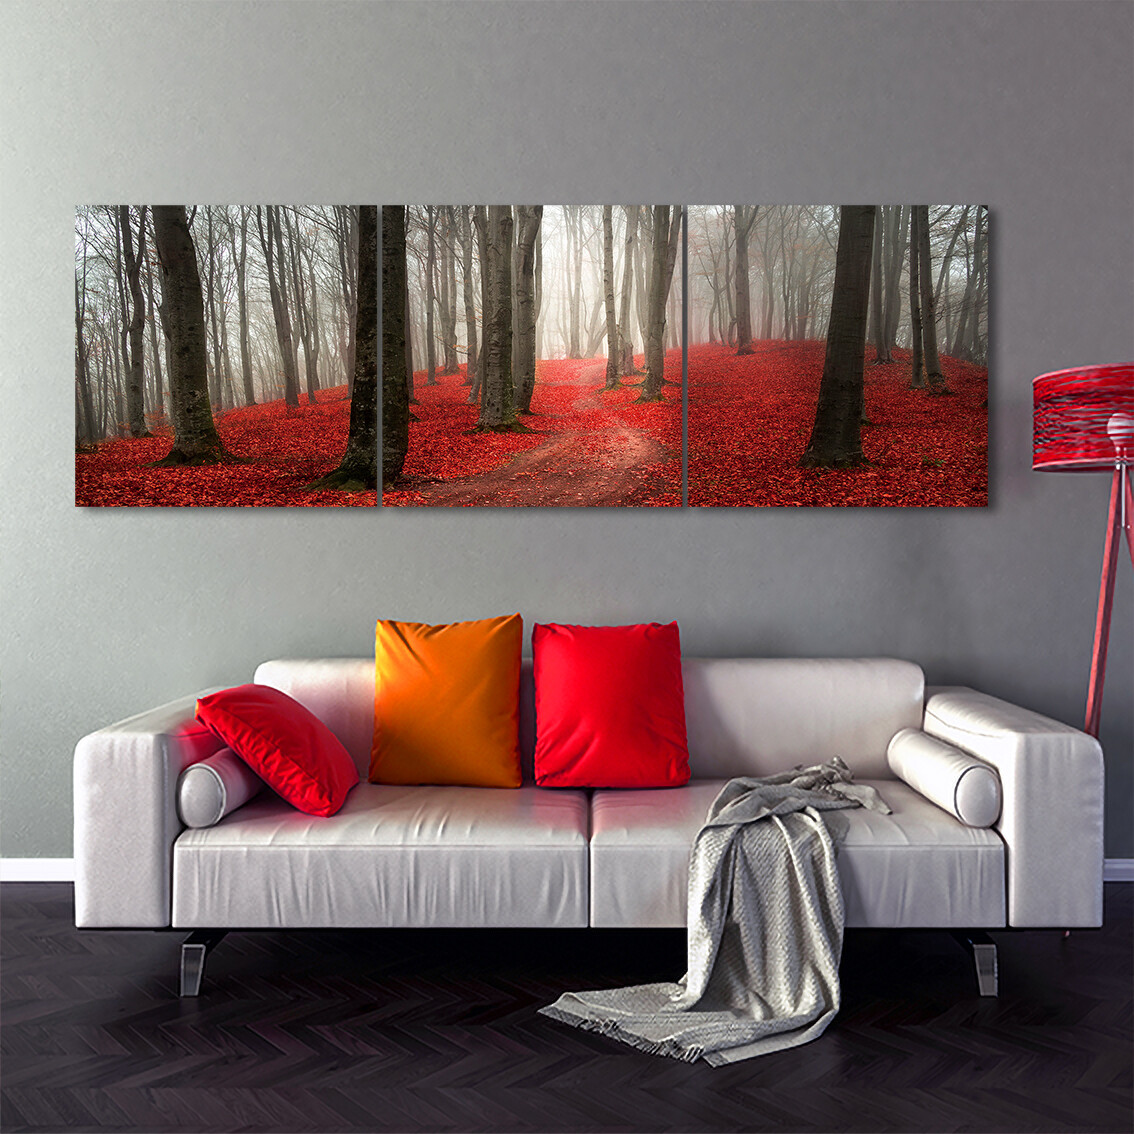 Enchanted Forest - Modern Luxury Wall art Printed on Acrylic Glass - Frameless and Ready to Hang